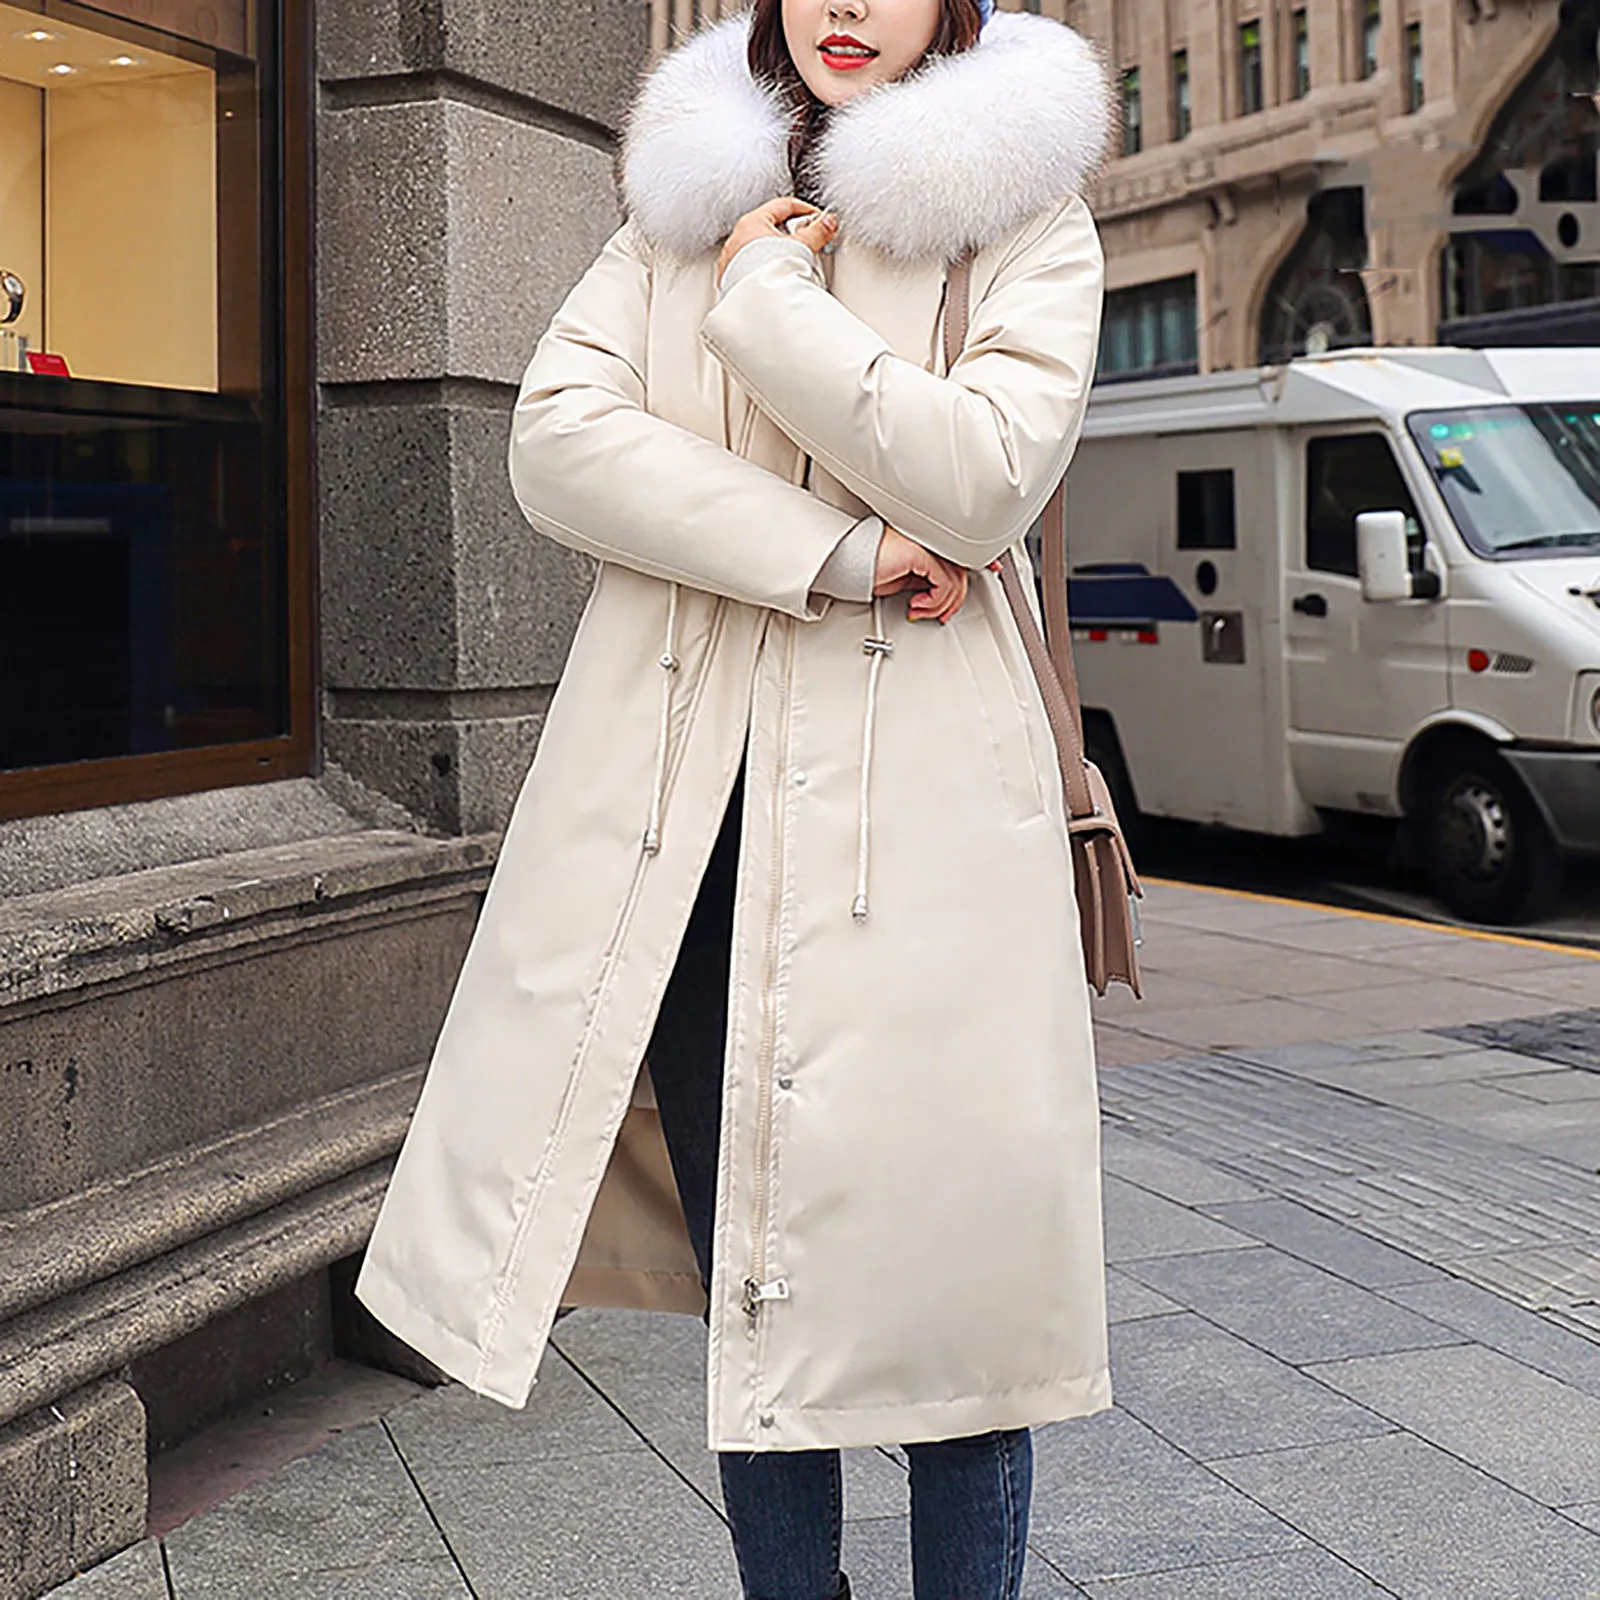 

Fashion Women Winter Warm Solid Colors Faux Fur Hooded Slim-fit Padded Thick Long Coat Parkas Jackets Outwear Piumini Donna#g3